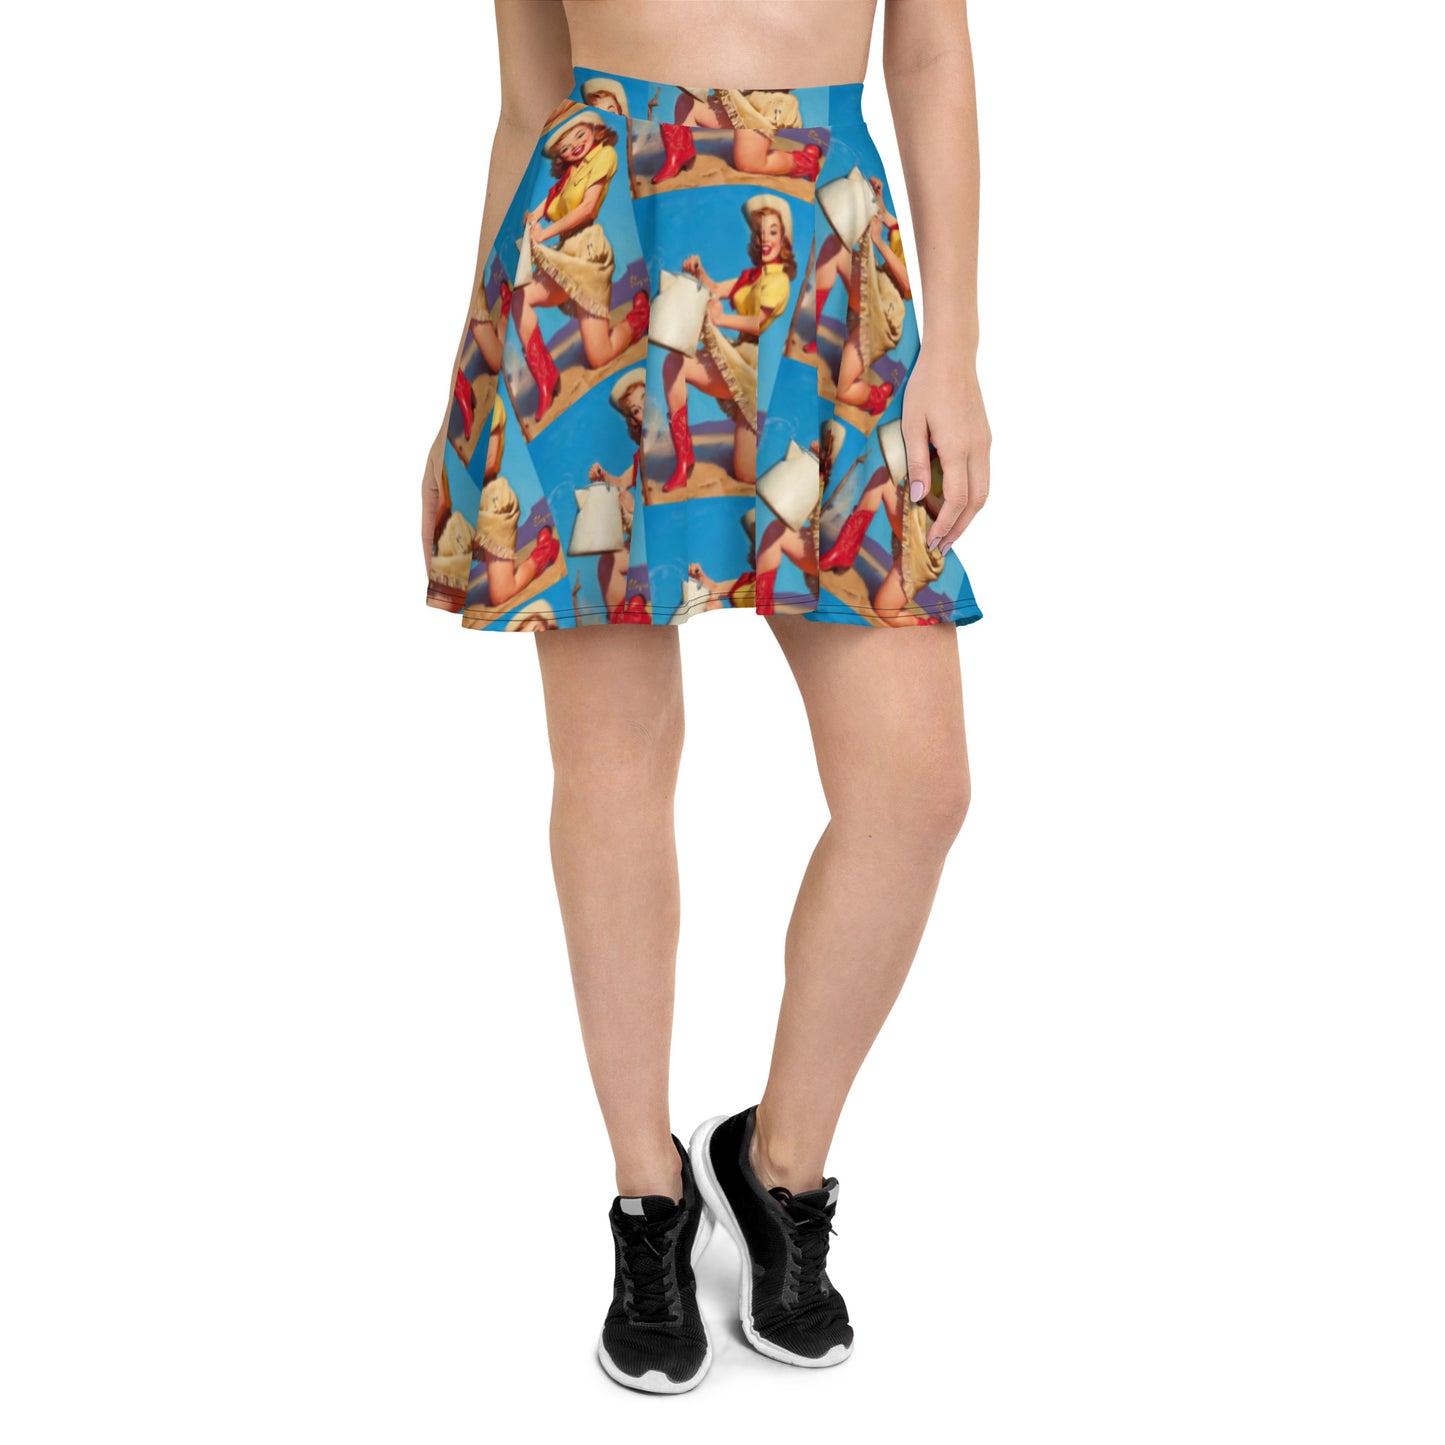 Pin Up Cowgirl Skater Skirt - cowgirl, pin up, pin up cowgirl, pinup, skater, skater skirt, skirt, vintage, vintage cowgirl, womens -  - Baha Ranch Western Wear